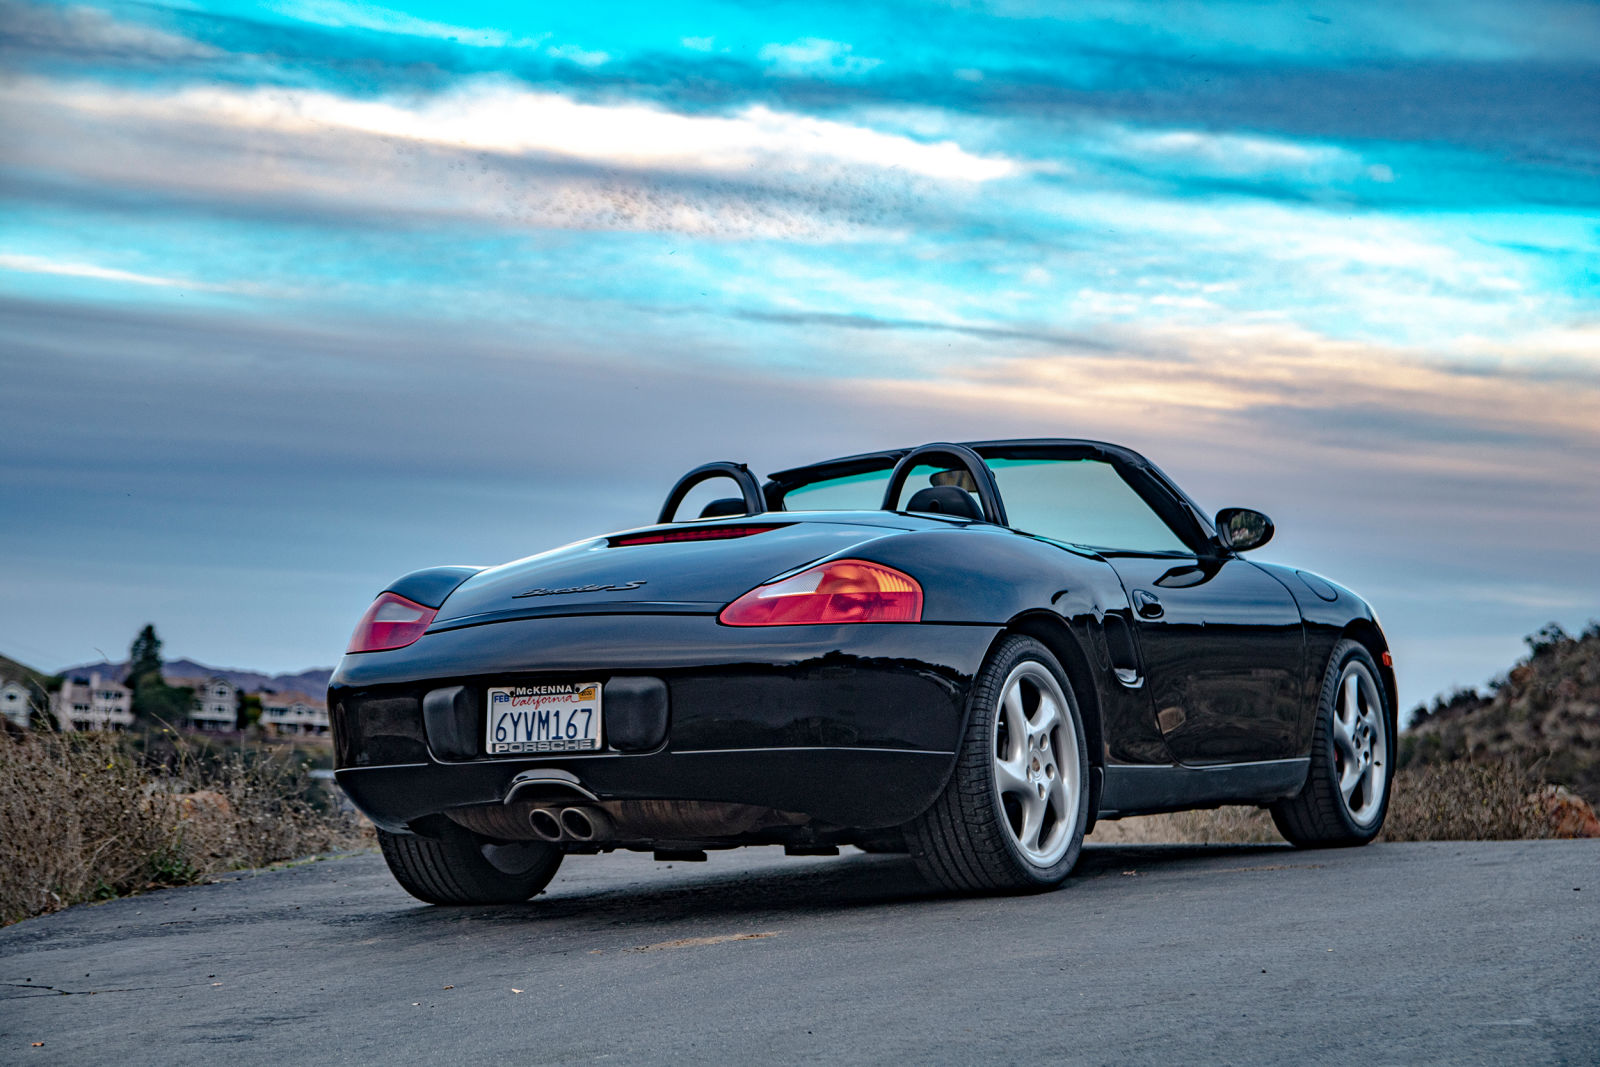 Illustration for article titled Porsche 986 Boxster S – Best Cheap Sports Car?